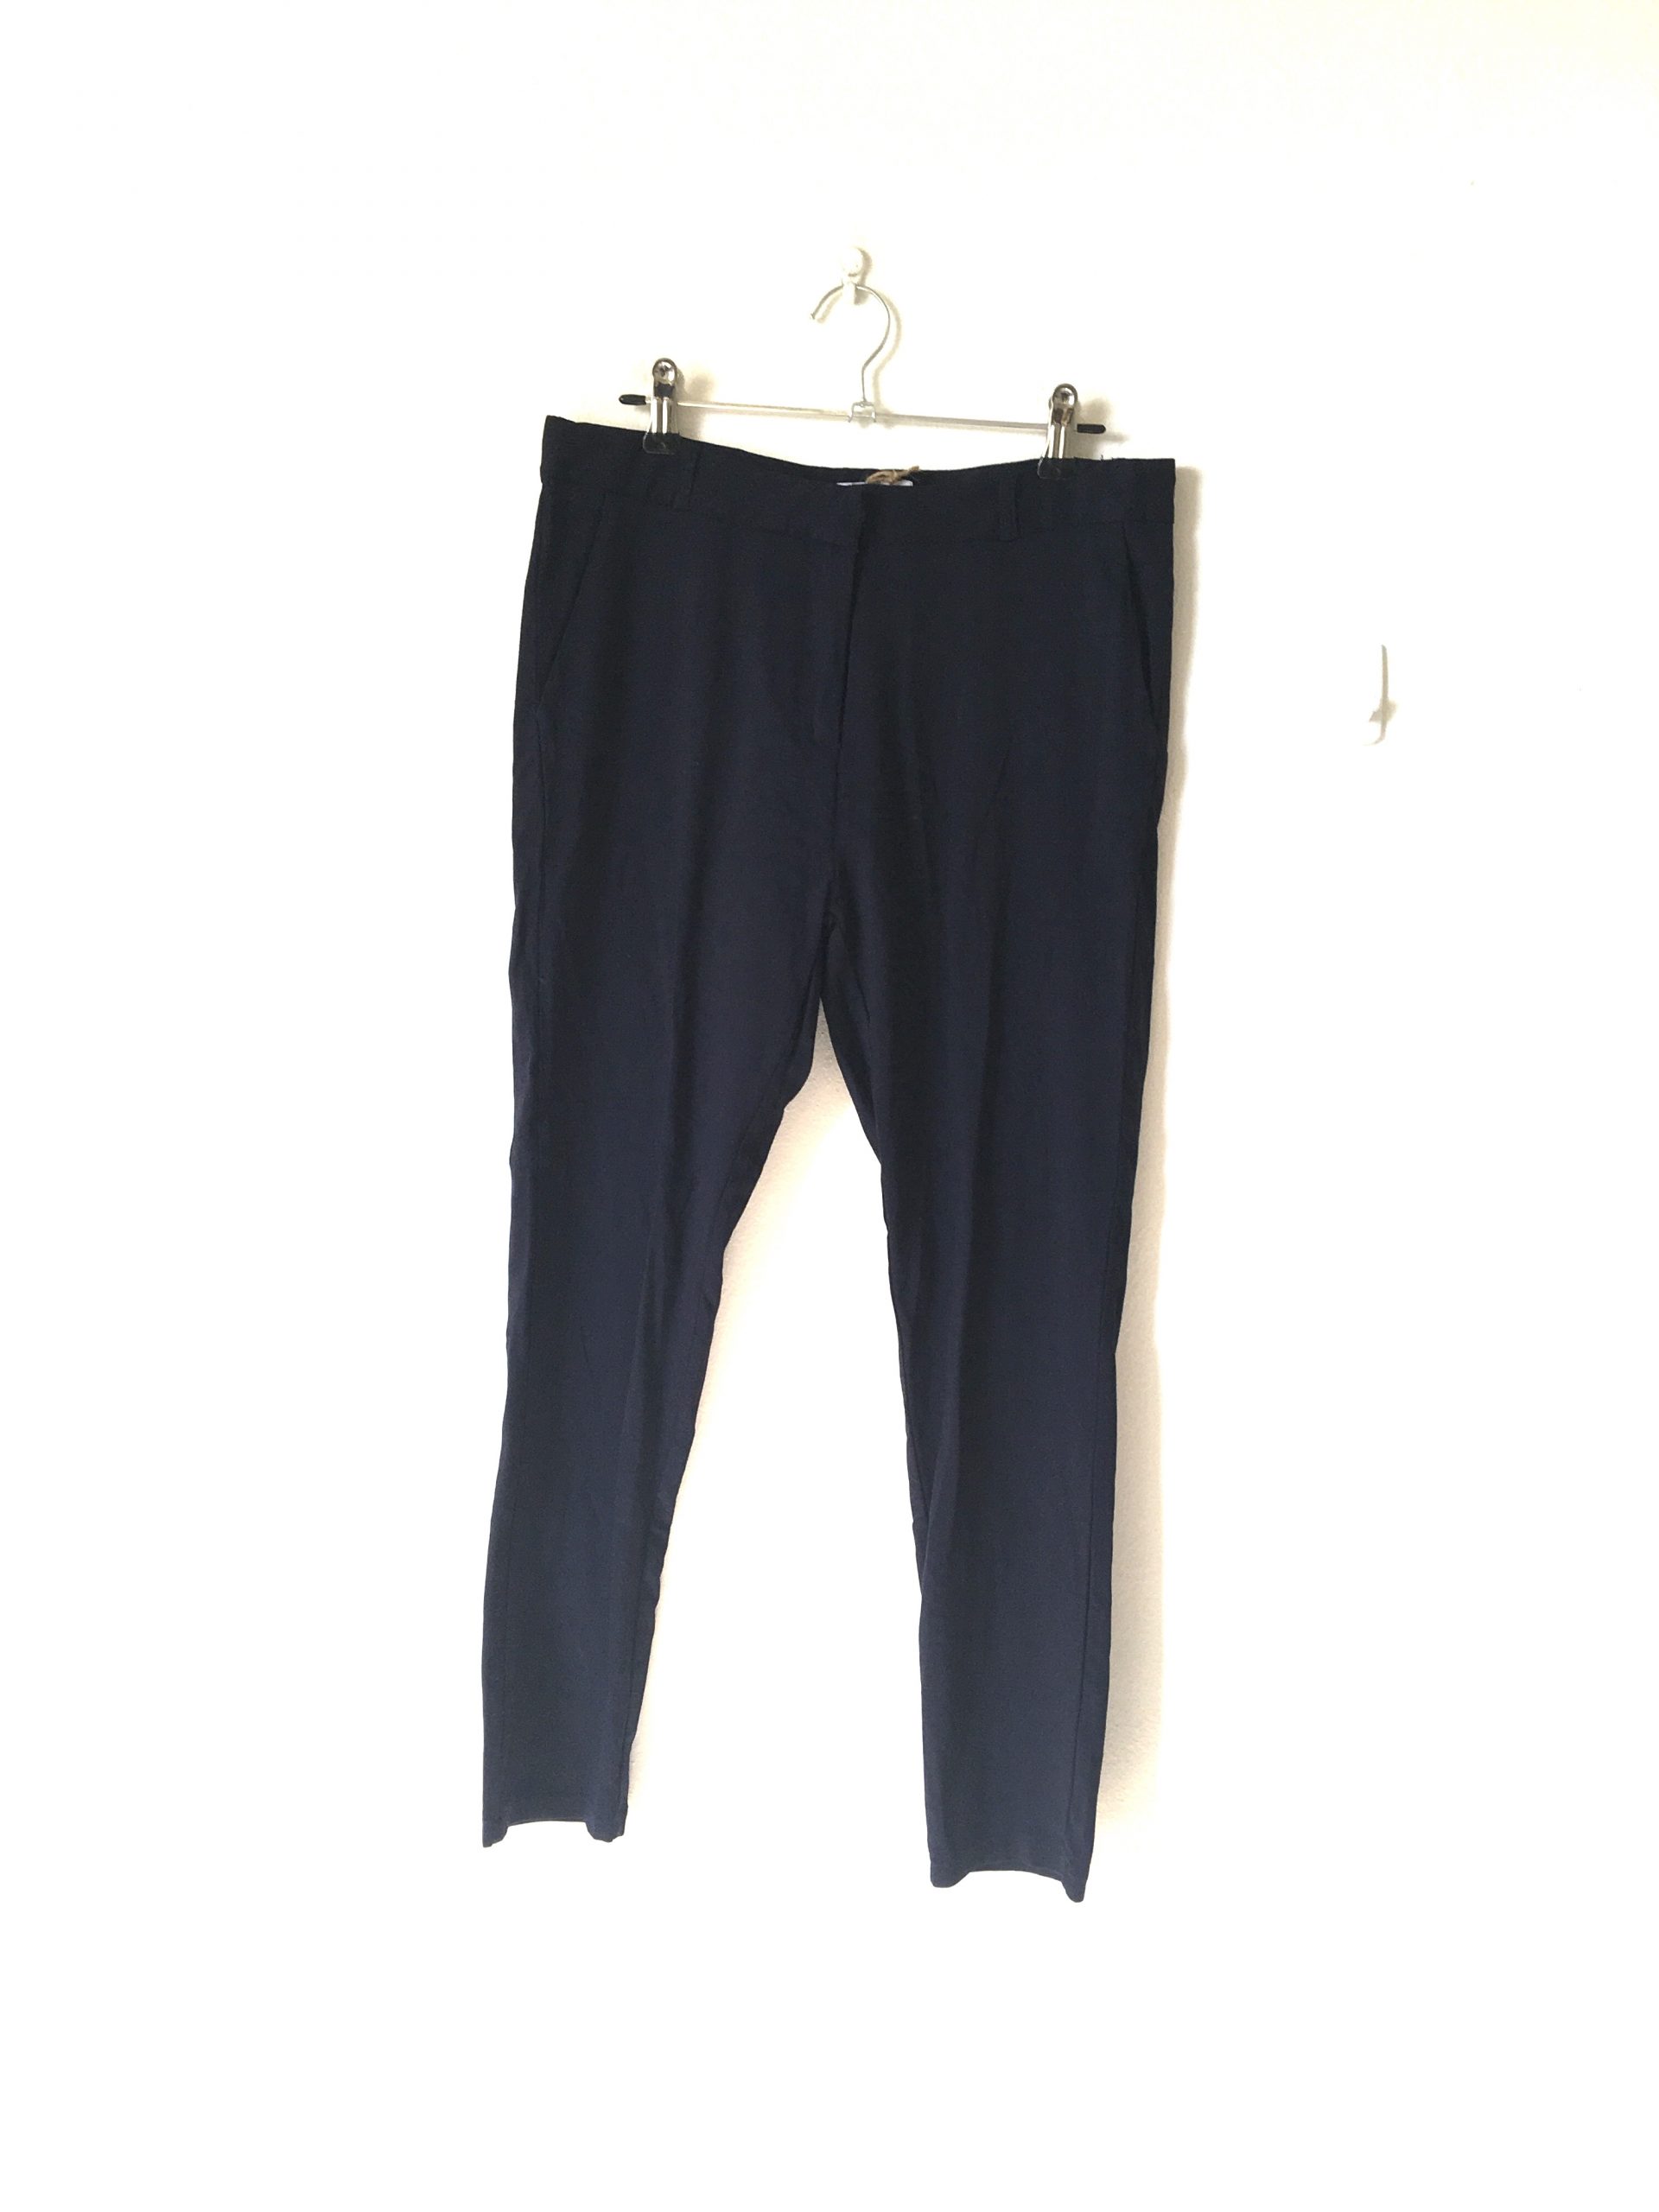 TEMT Navy Cropped Work Pants - The Re: Club